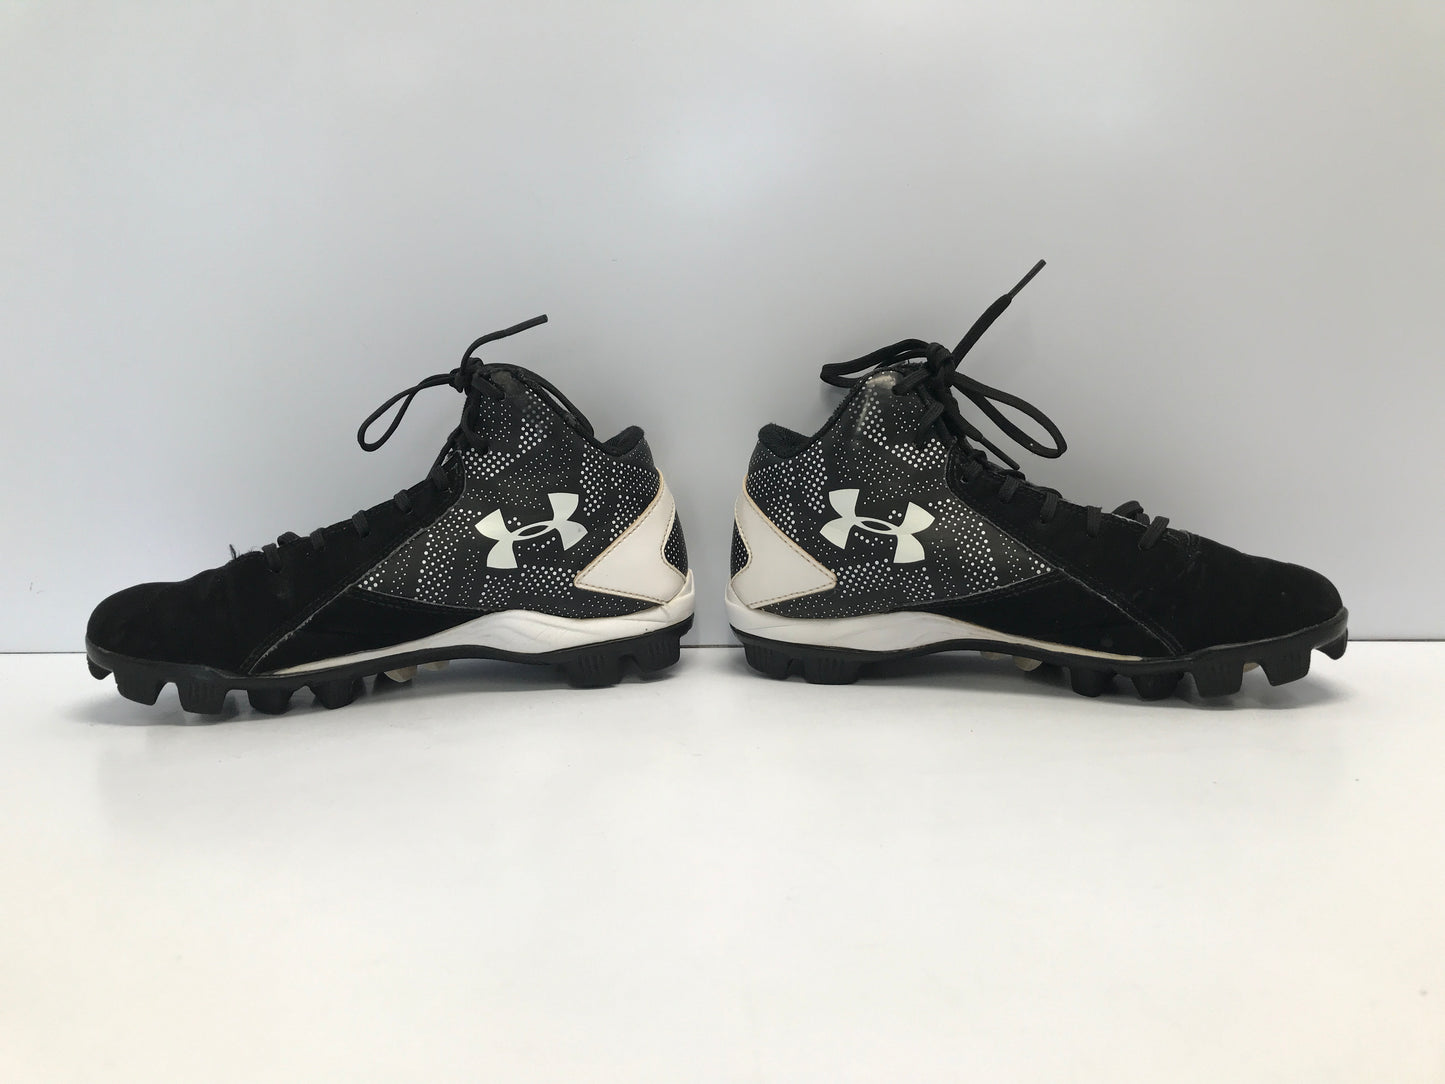 Baseball Shoes Cleats Child Size 4 Under Armor High Tops Black White Excellent